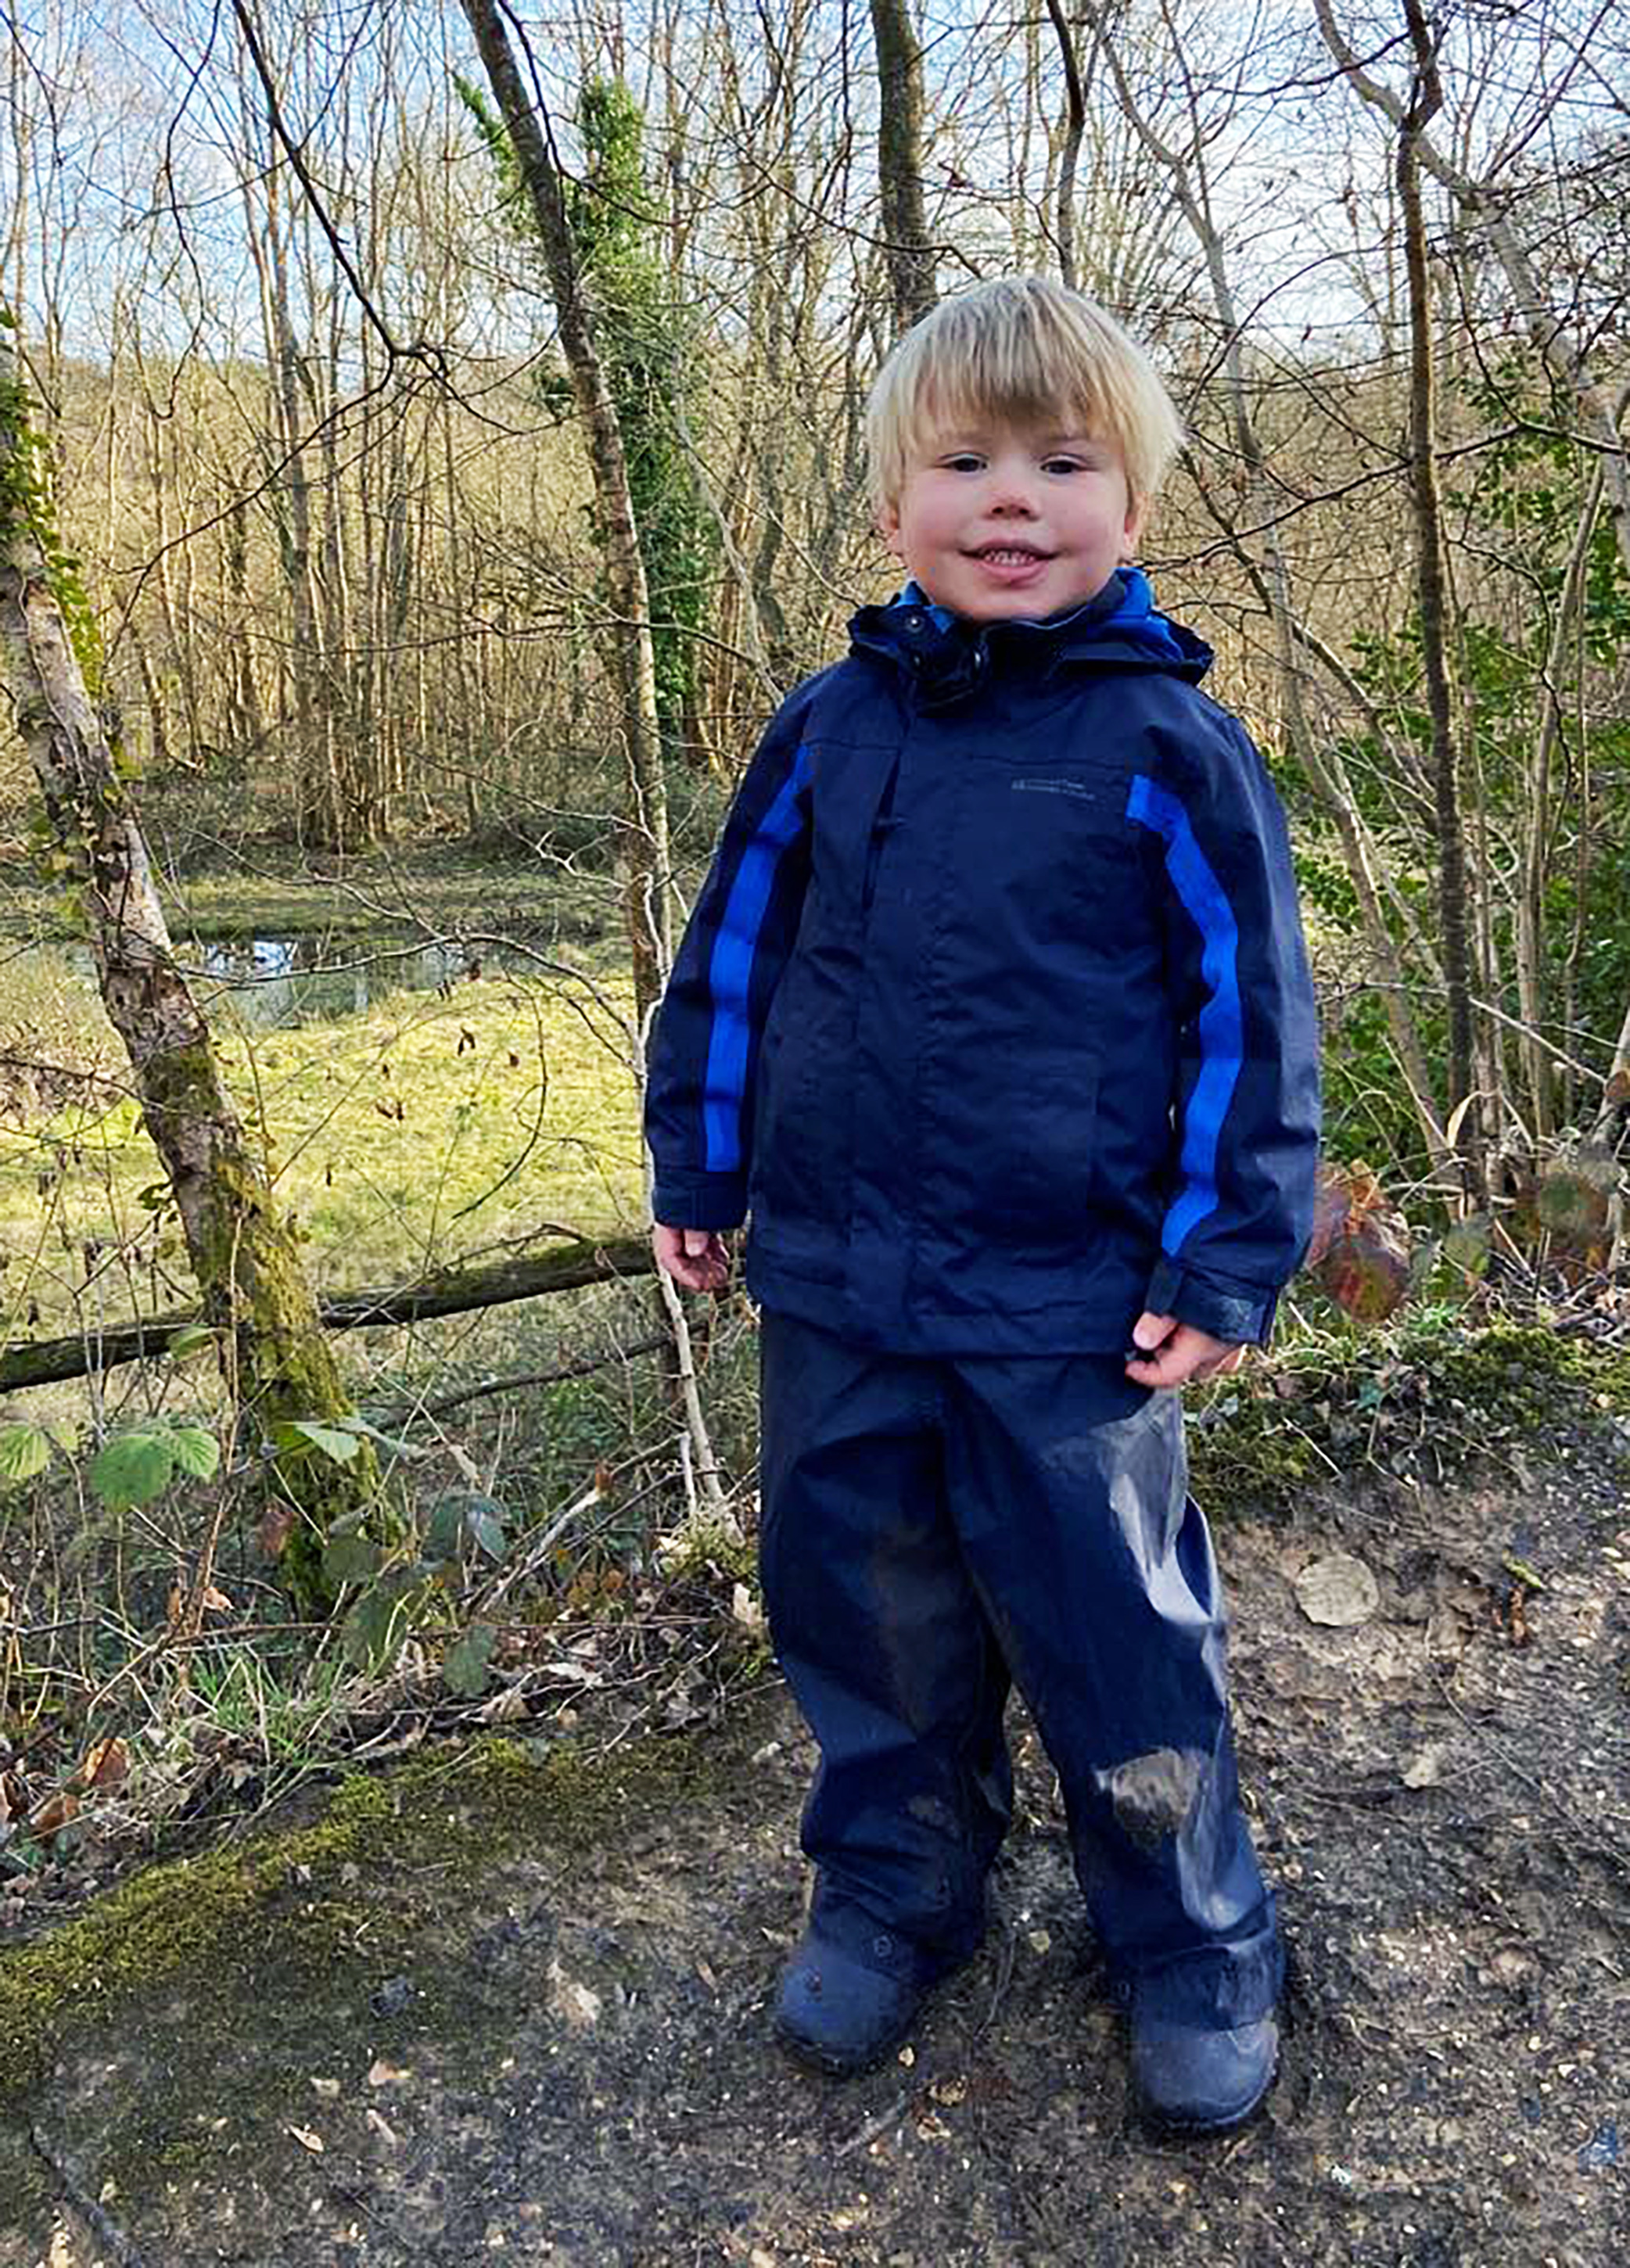 Tributes to Dylan, 3, after tragic canal fall in Newbury. Pic from Hyde News